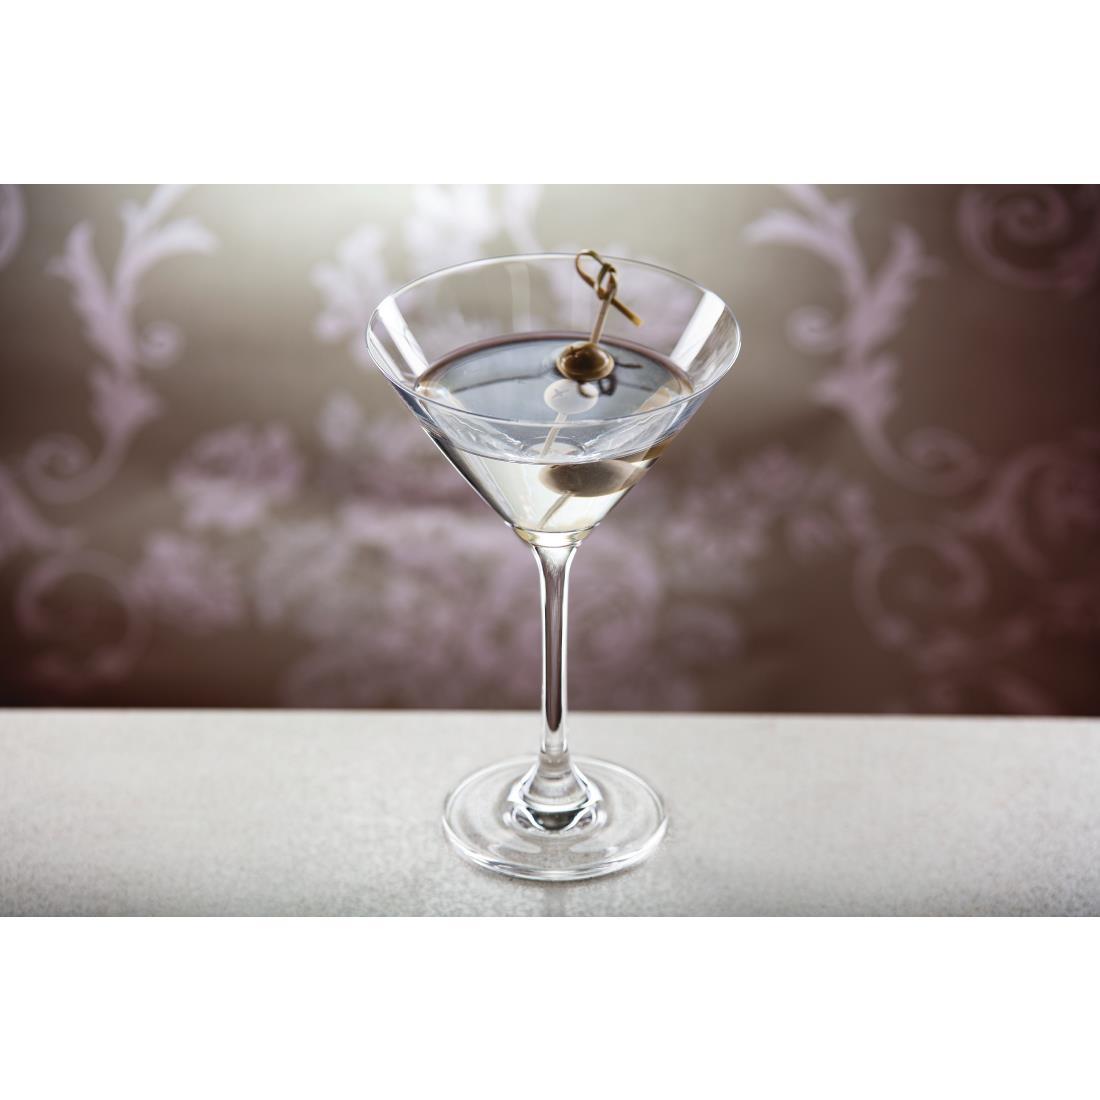 Olympia Bar Collection Crystal Martini Glasses 275ml (Pack of 6) - GF731  - 5